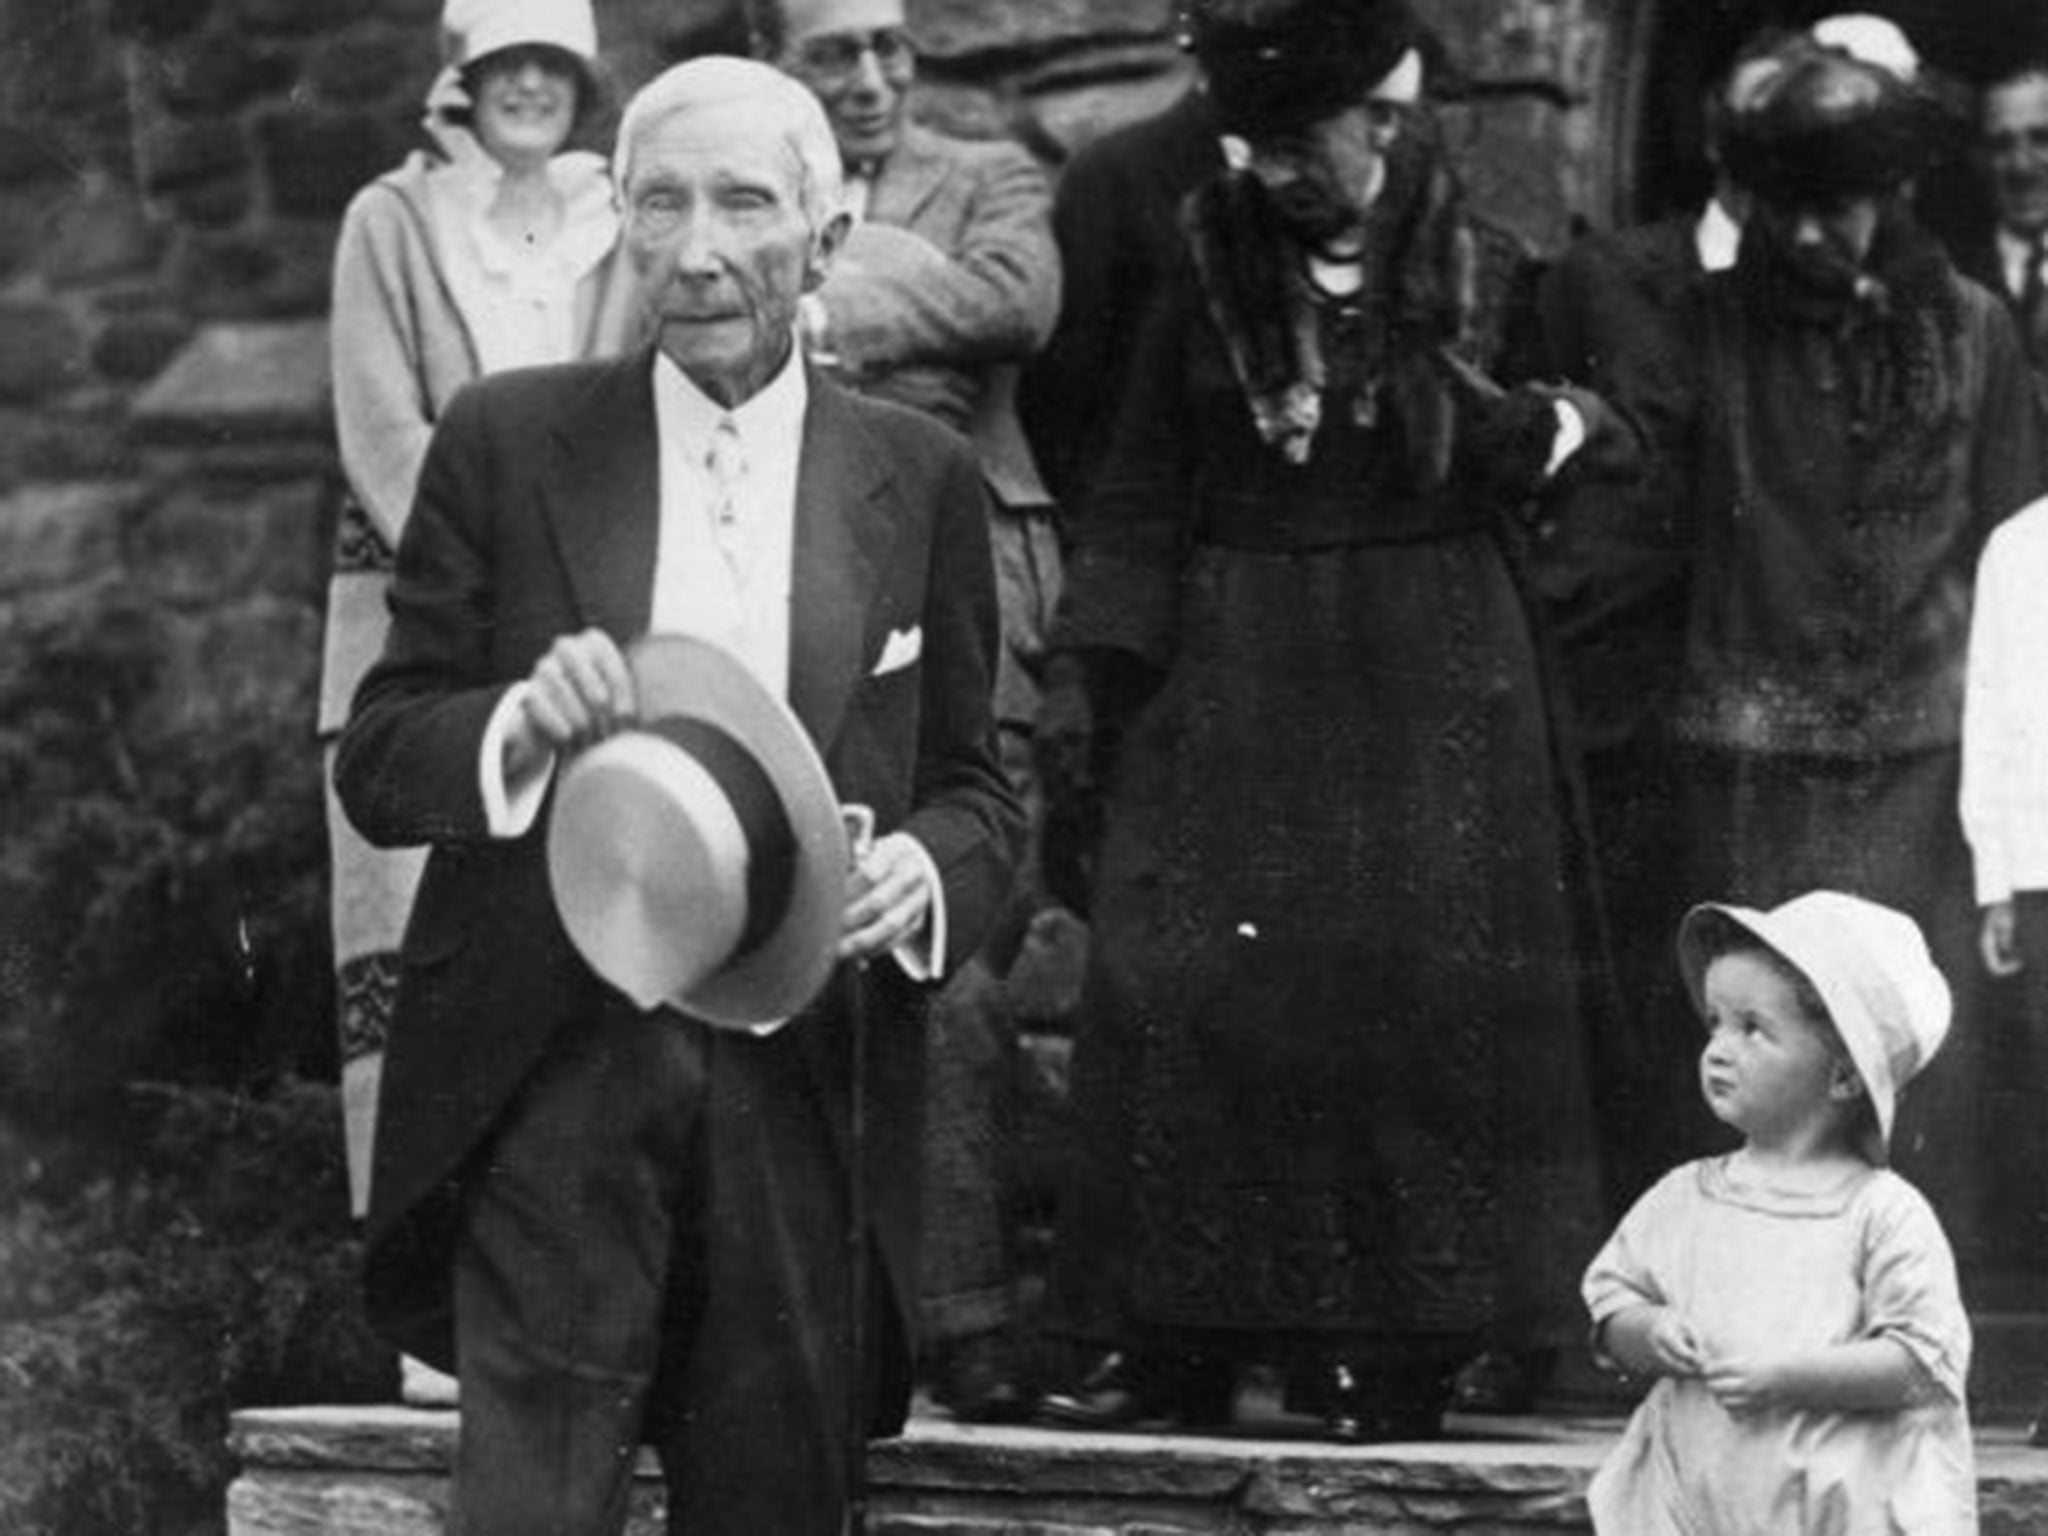 John D Rockefeller on his 84th birthday in 1923; his wealth came from oil (Getty)